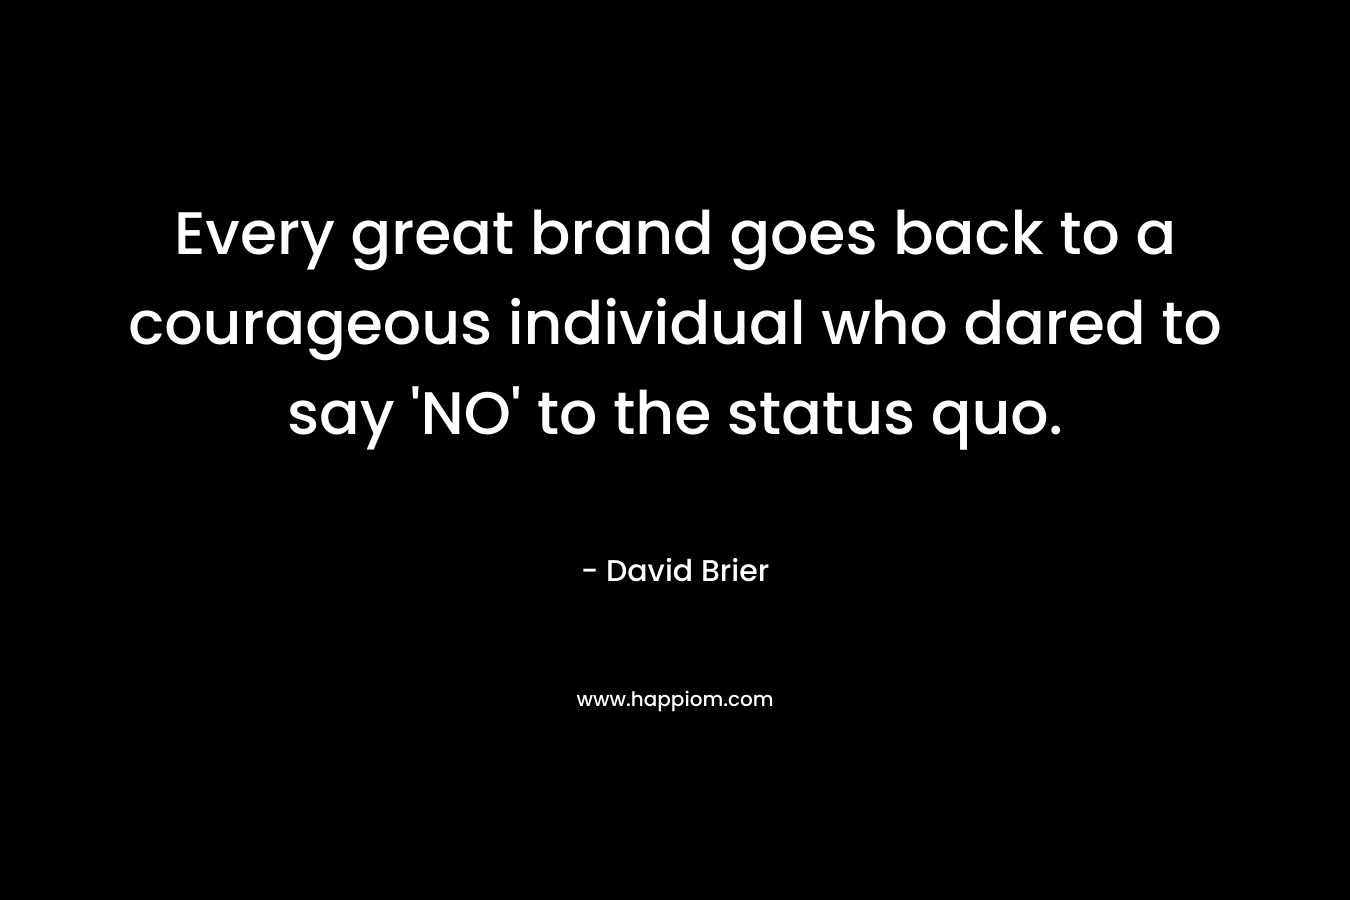 Every great brand goes back to a courageous individual who dared to say 'NO' to the status quo.